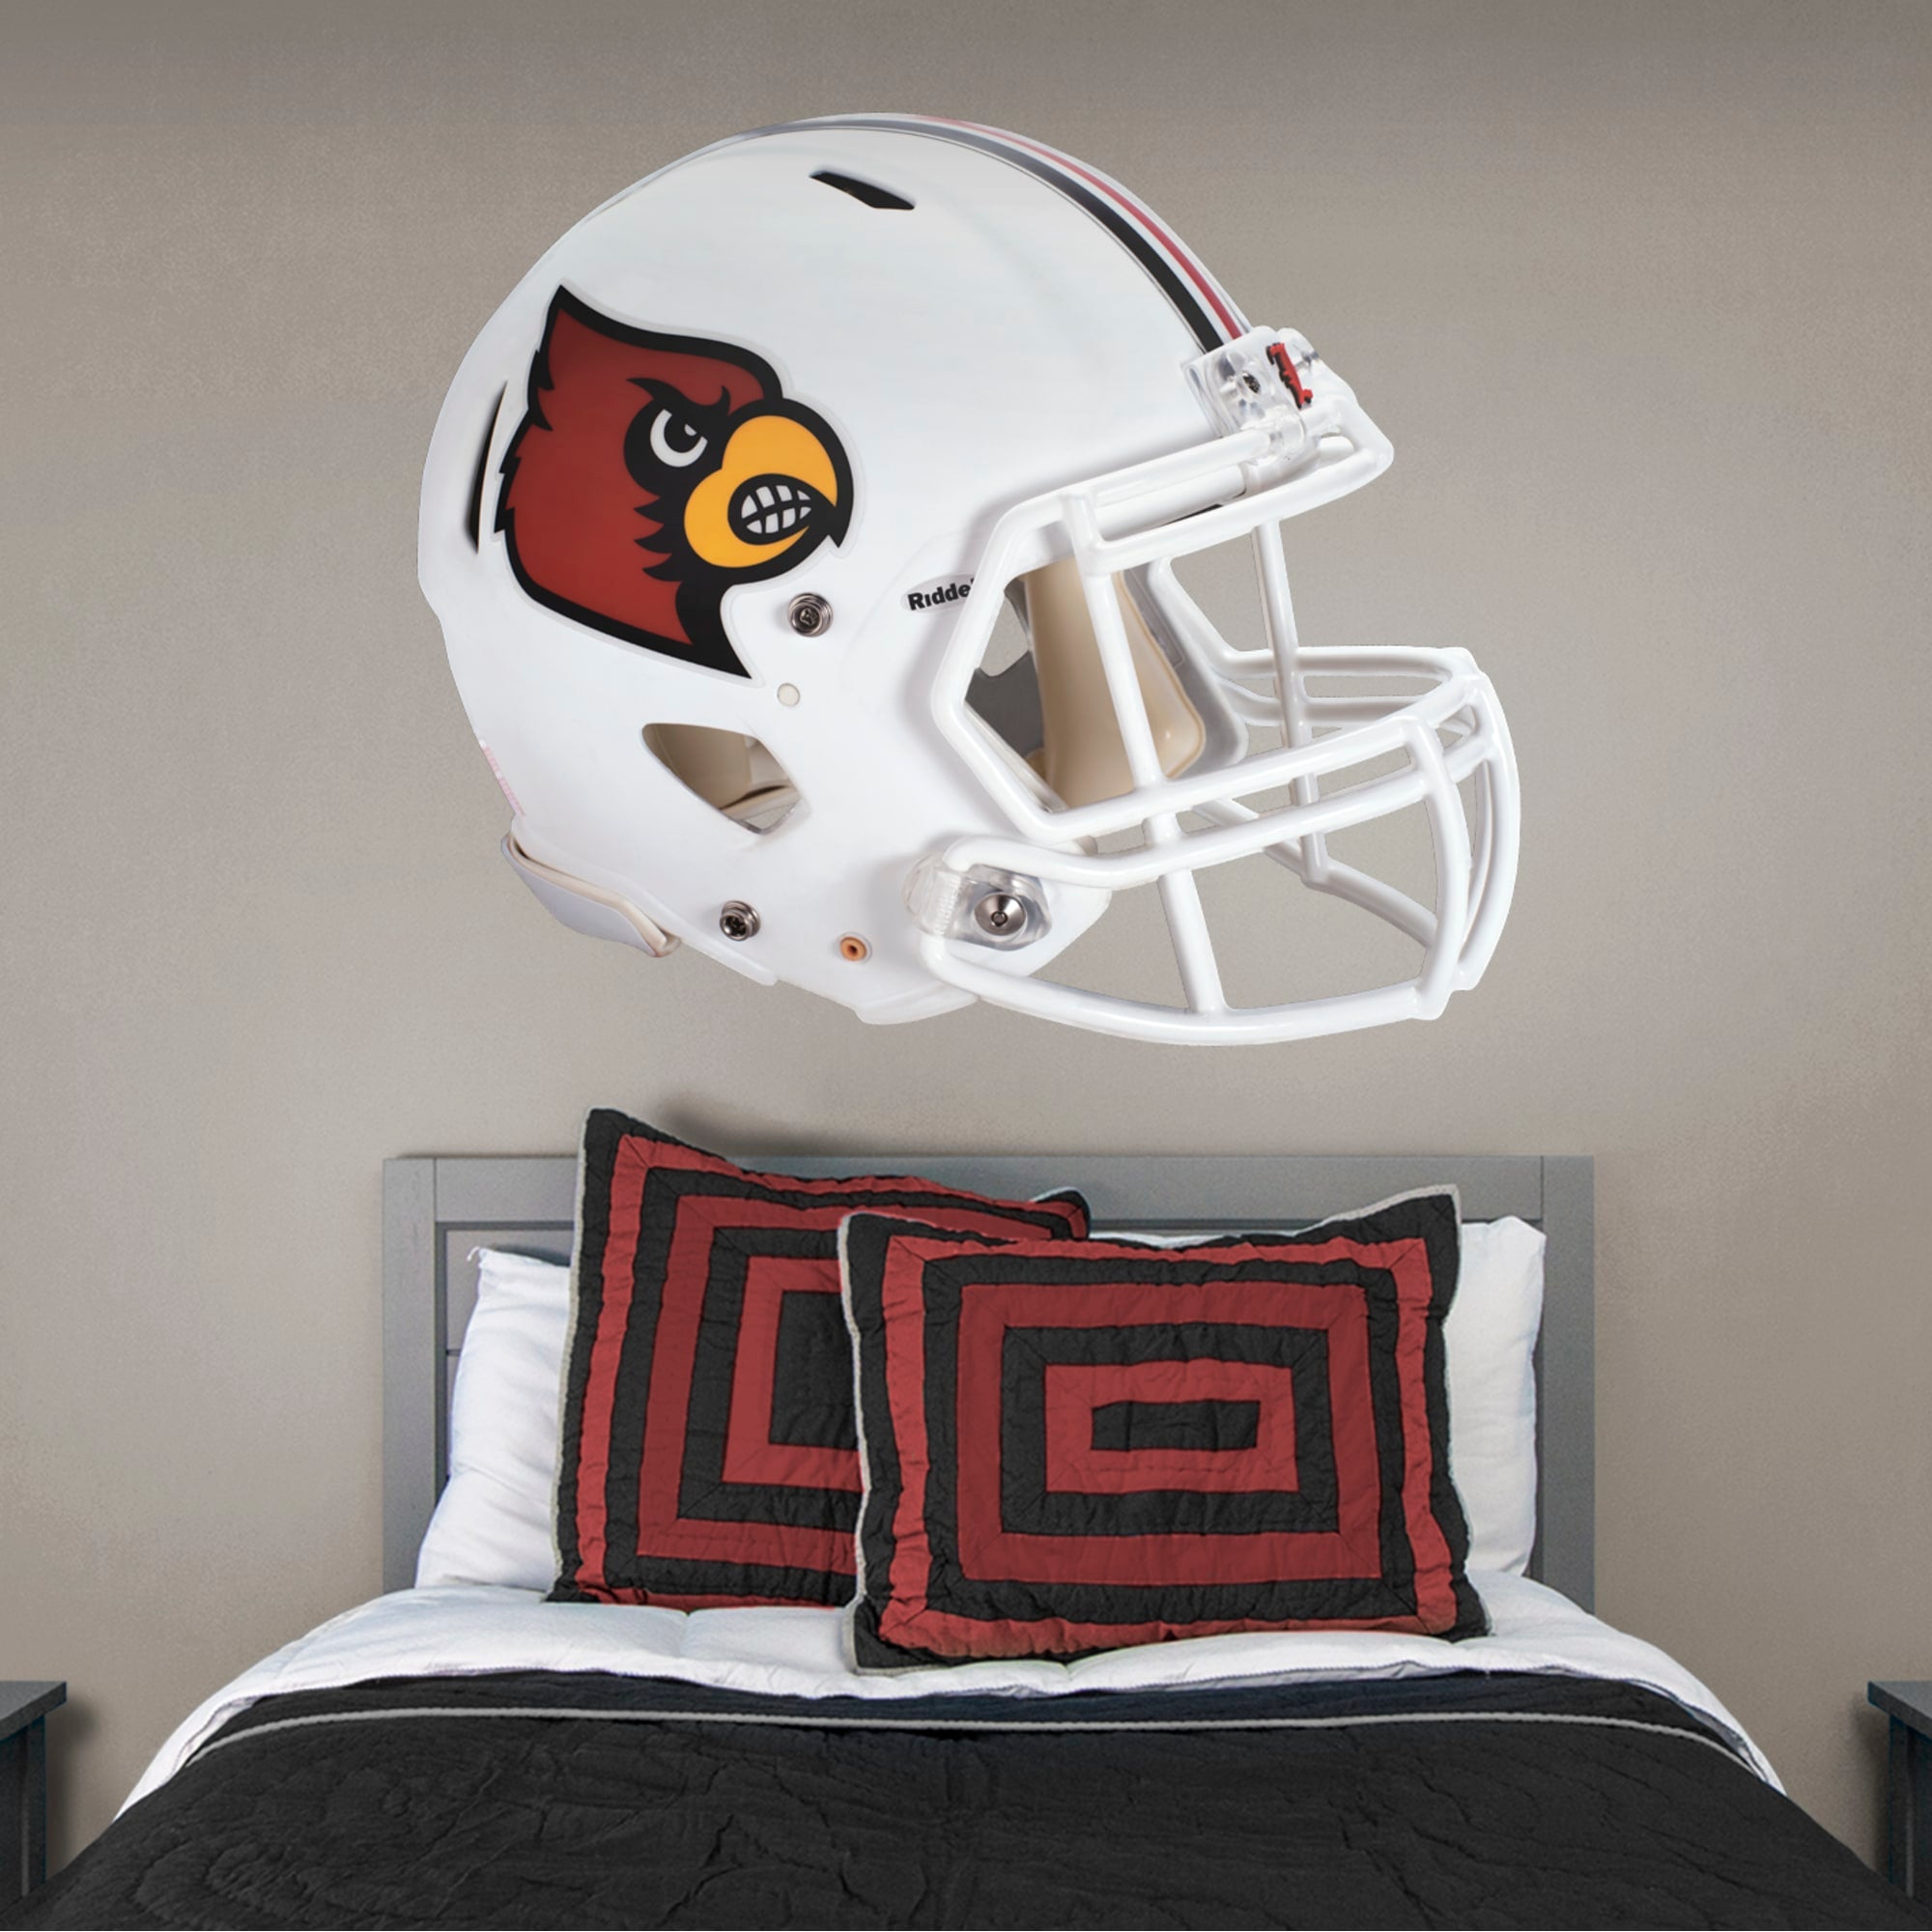 Louisville Cardinals: Helmet - Officially Licensed Removable Wall Decal 54.5"W x 45.0"H by Fathead | Vinyl